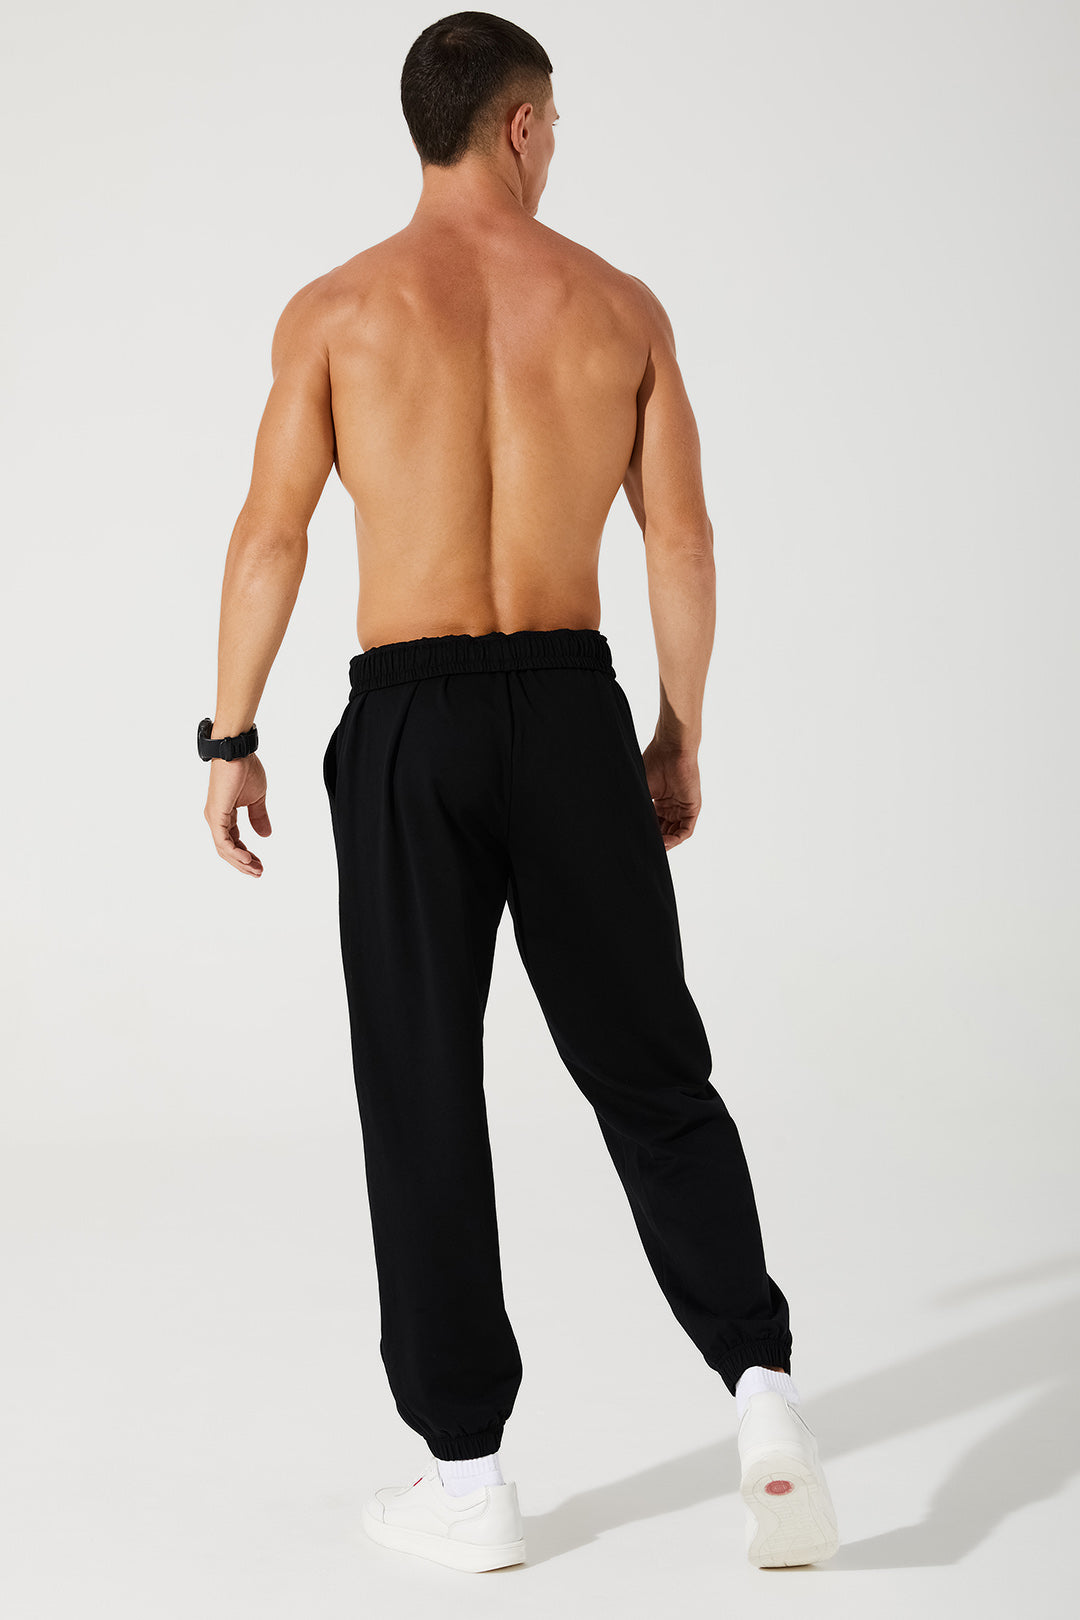 Black men's sweatpants and trousers for Janet, style OW-0034-MTR-BK, in 3rd variation.